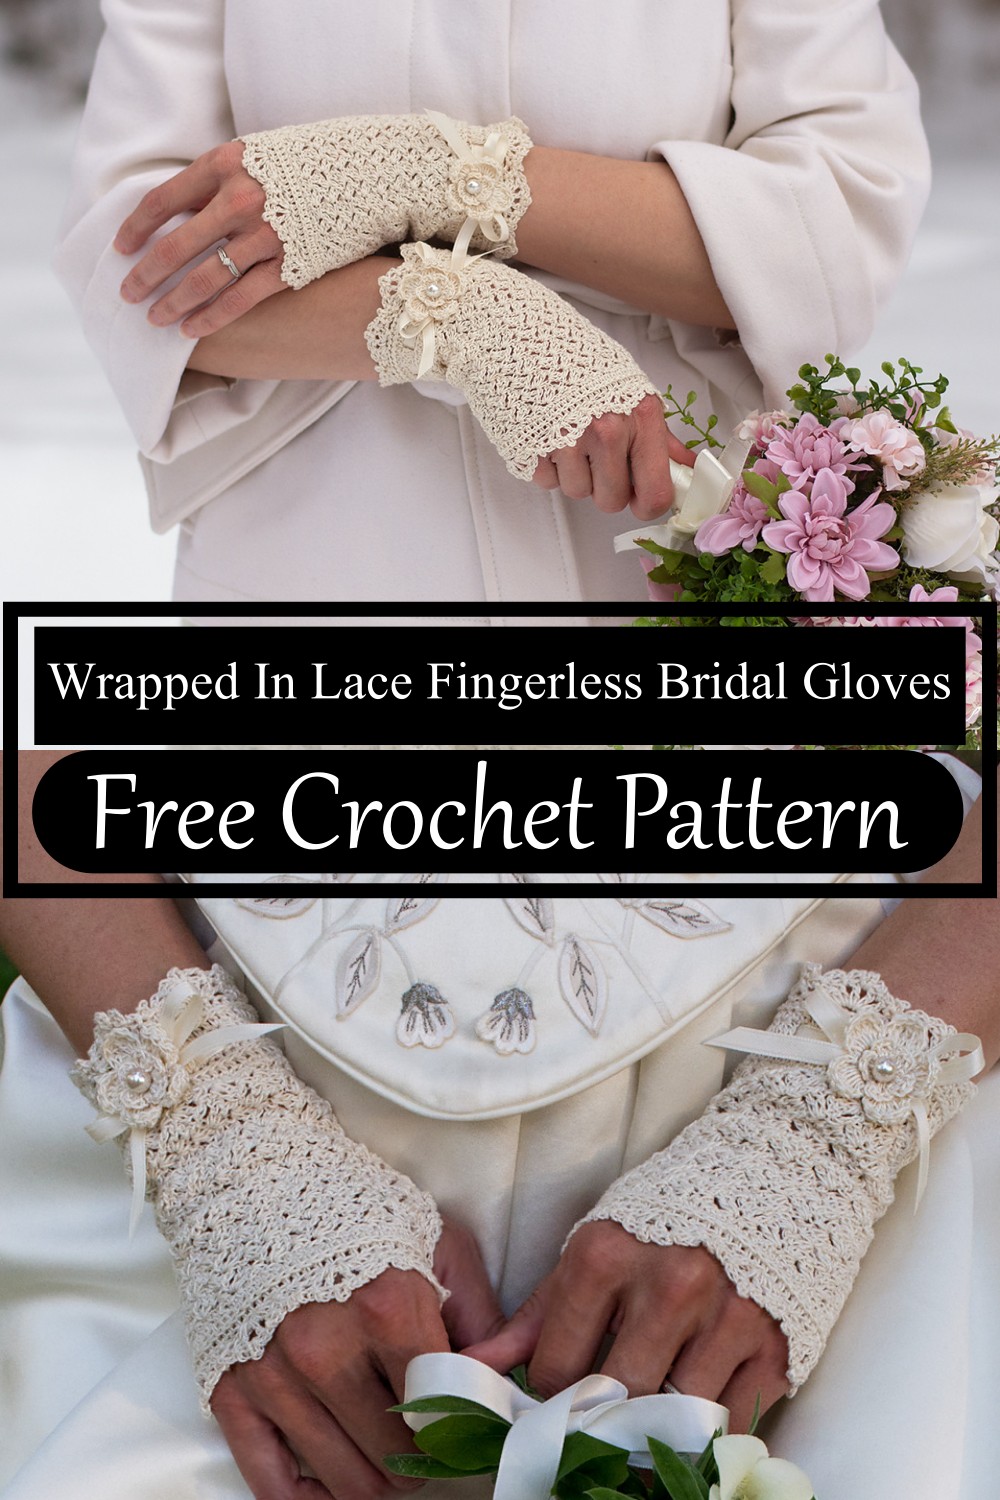 Wrapped In Lace Fingerless Bridal Gloves